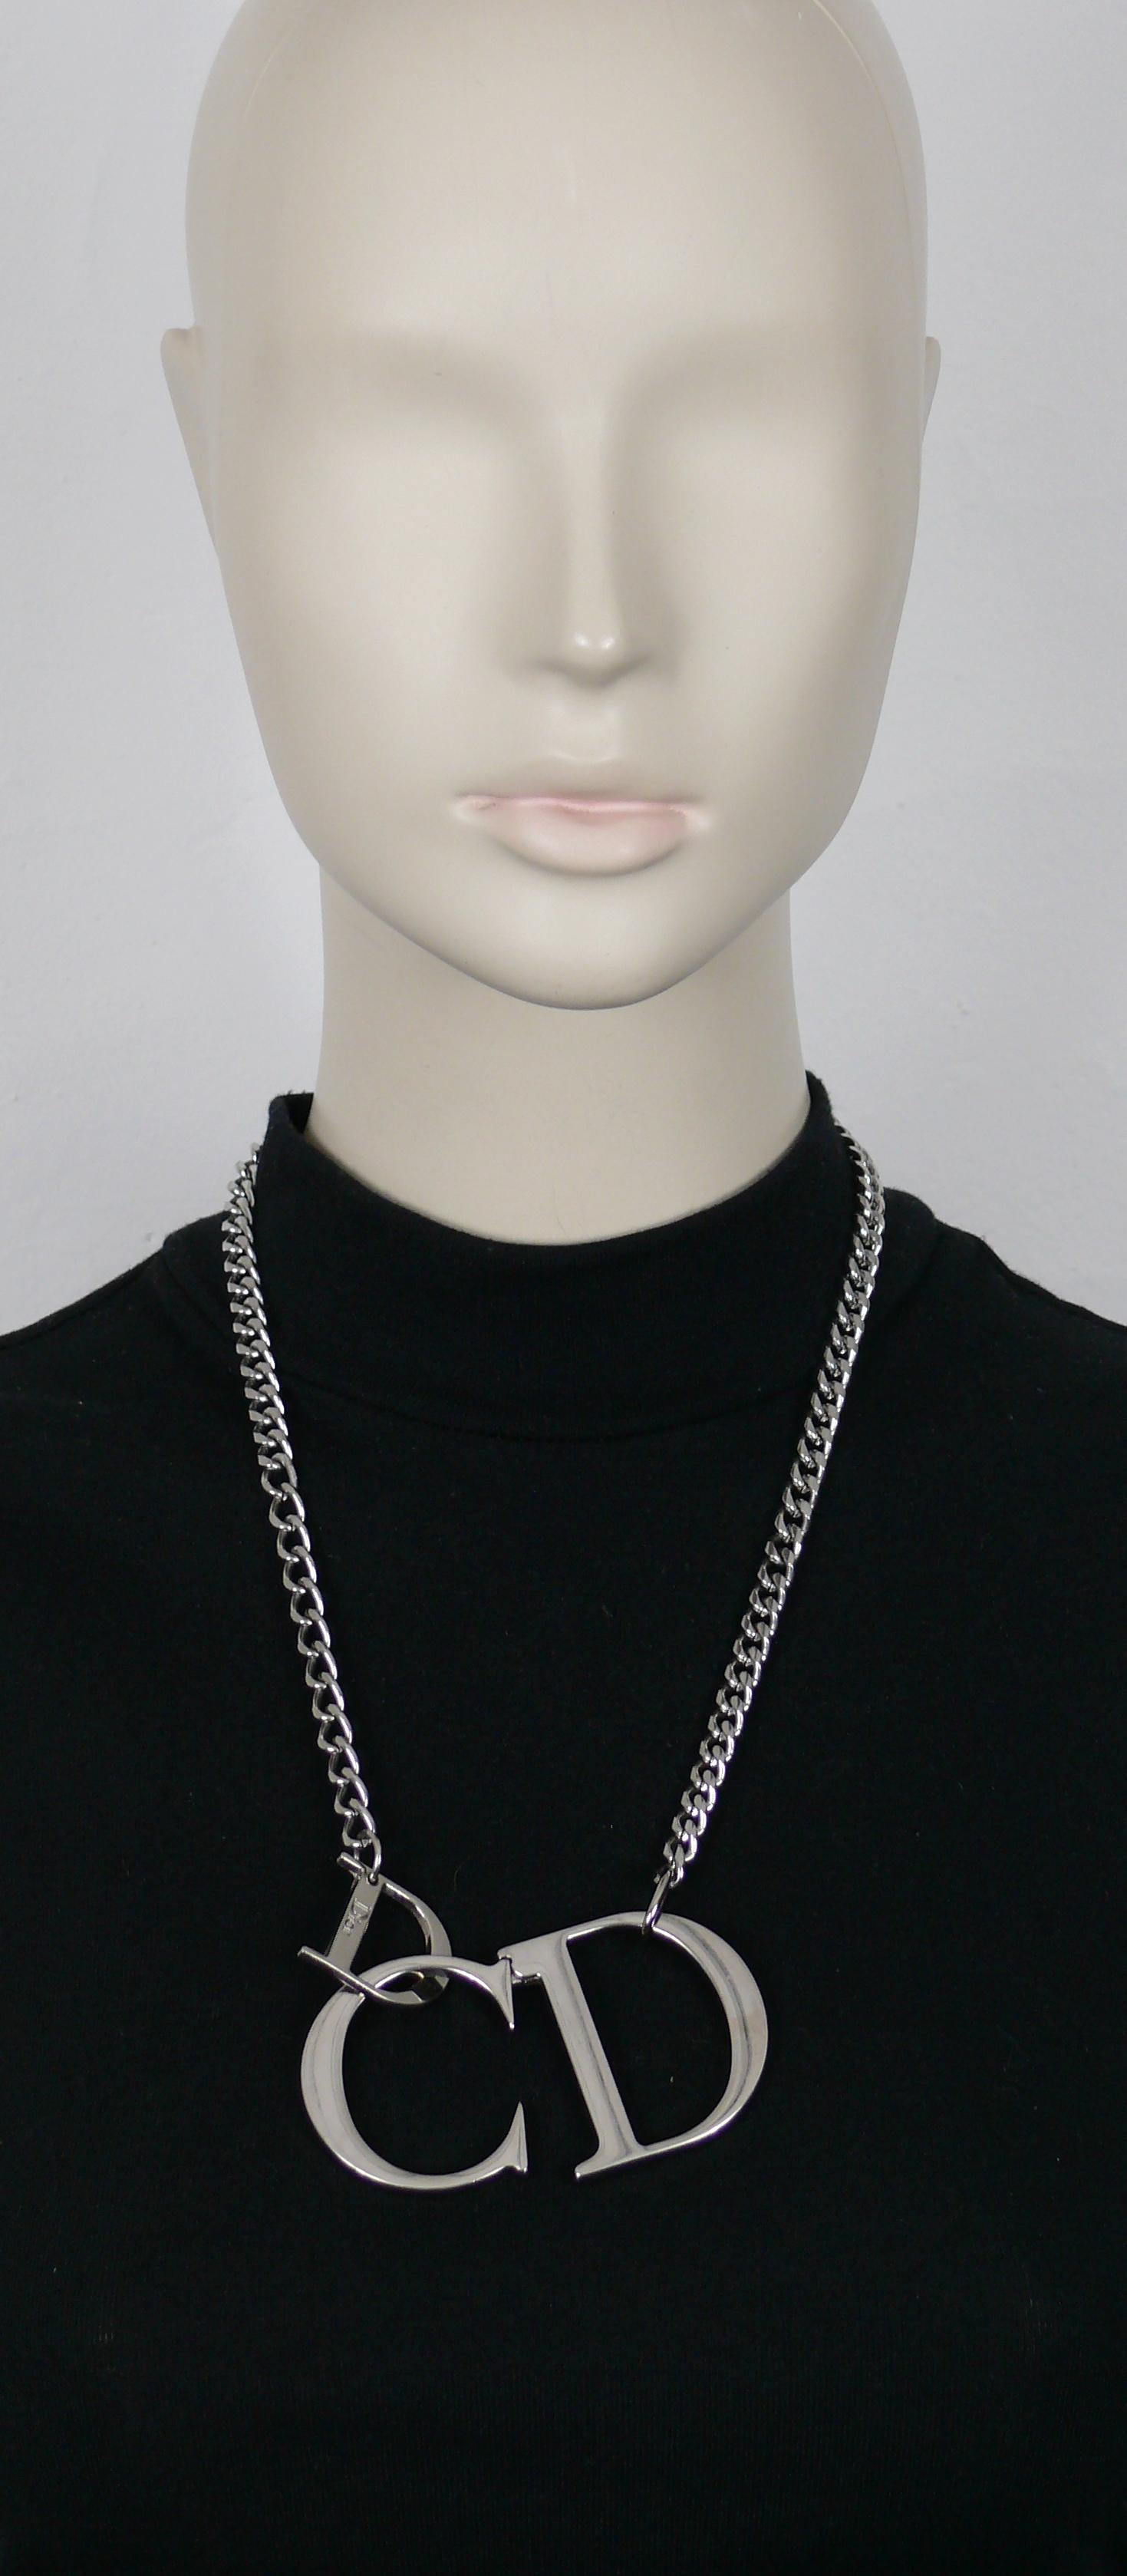 CHRISTIAN DIOR by JOHN GALLIANO silver tone chain necklace featuring a large articulated CD logo.

D hoop closure (see pictures).

Embossed CHRISTIAN DIOR on the CD logo and DIOR on the D hoop.

Indicative measurements : wearable length approx. 59